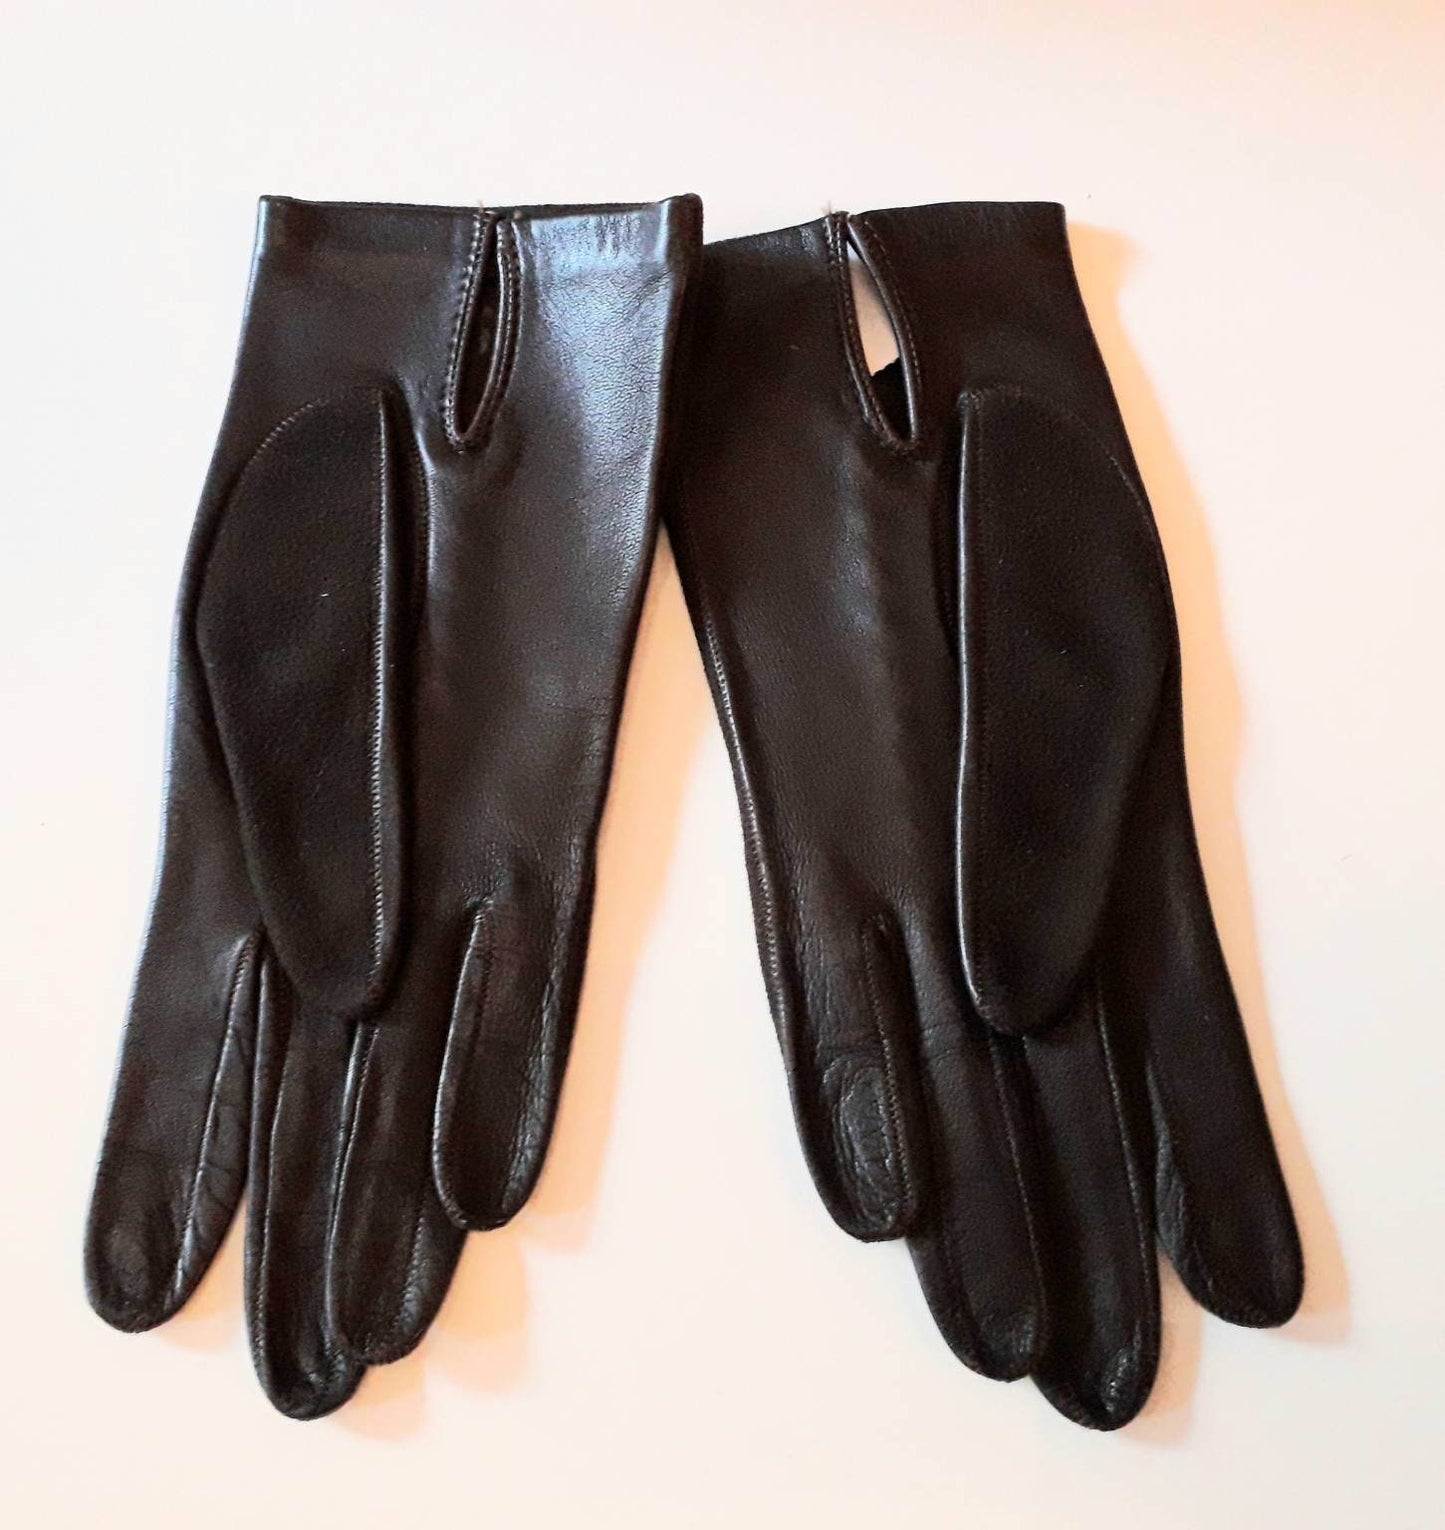 Vintage Leather Suede Gloves 1950s Very Thin Dark Brown Gloves Tiny Leather Embossed Circles Elegant Rockabilly 6 3/4